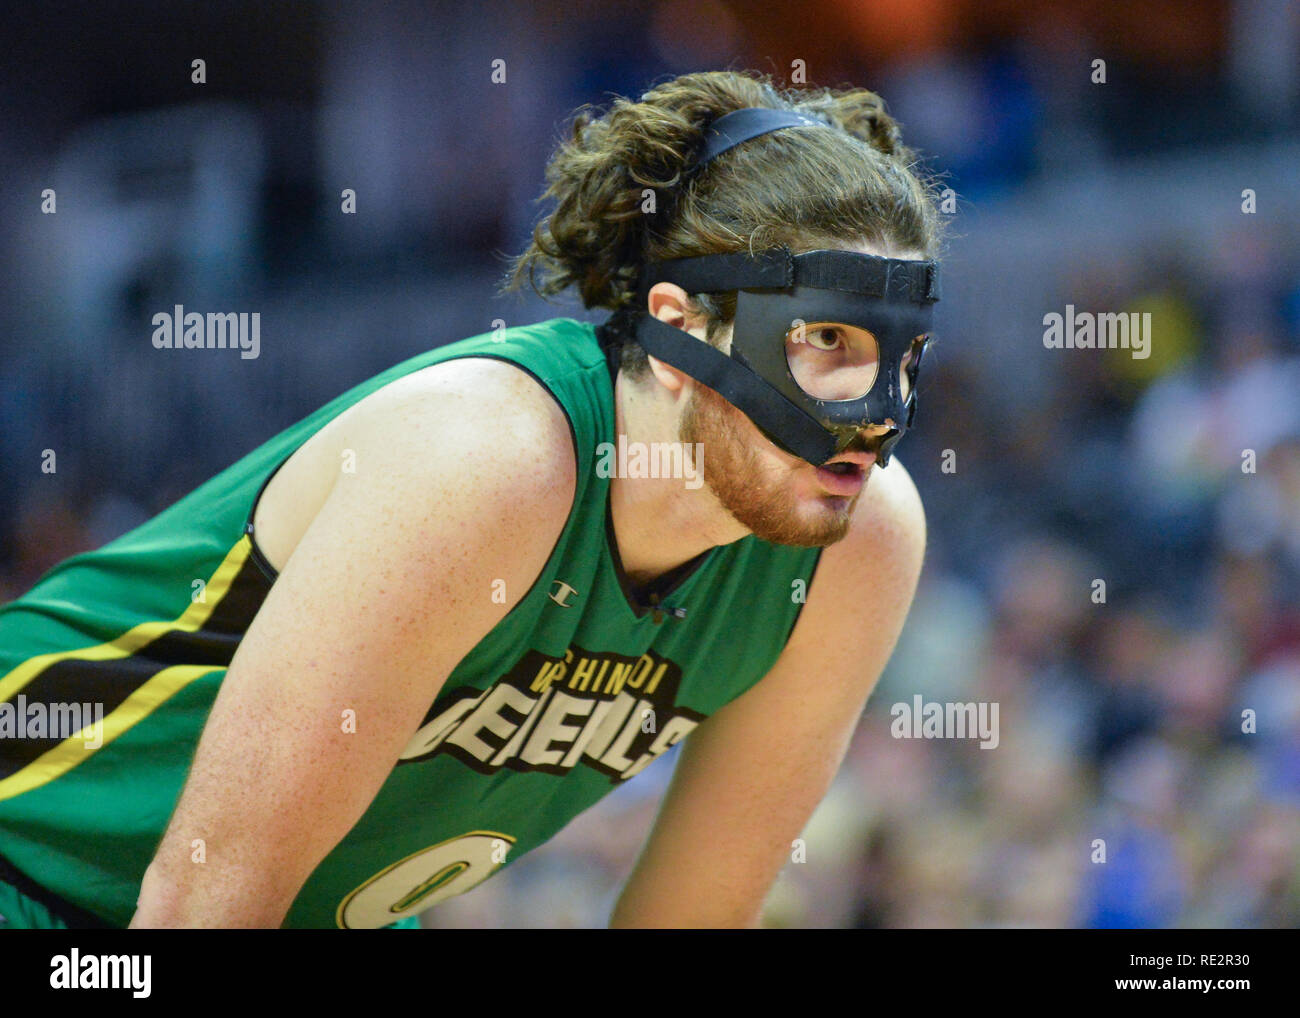 Memphis, TN, USA. 18th Jan, 2019. Washington Generals forward, Cage (Luke Piotrowski) (0), during the exhibition game against the Washington Generals at Fed Ex Forum in Memphis, TN. Kevin Langley/Sports South Media/CSM/Alamy Live News Credit: Cal Sport Media/Alamy Live News Stock Photo